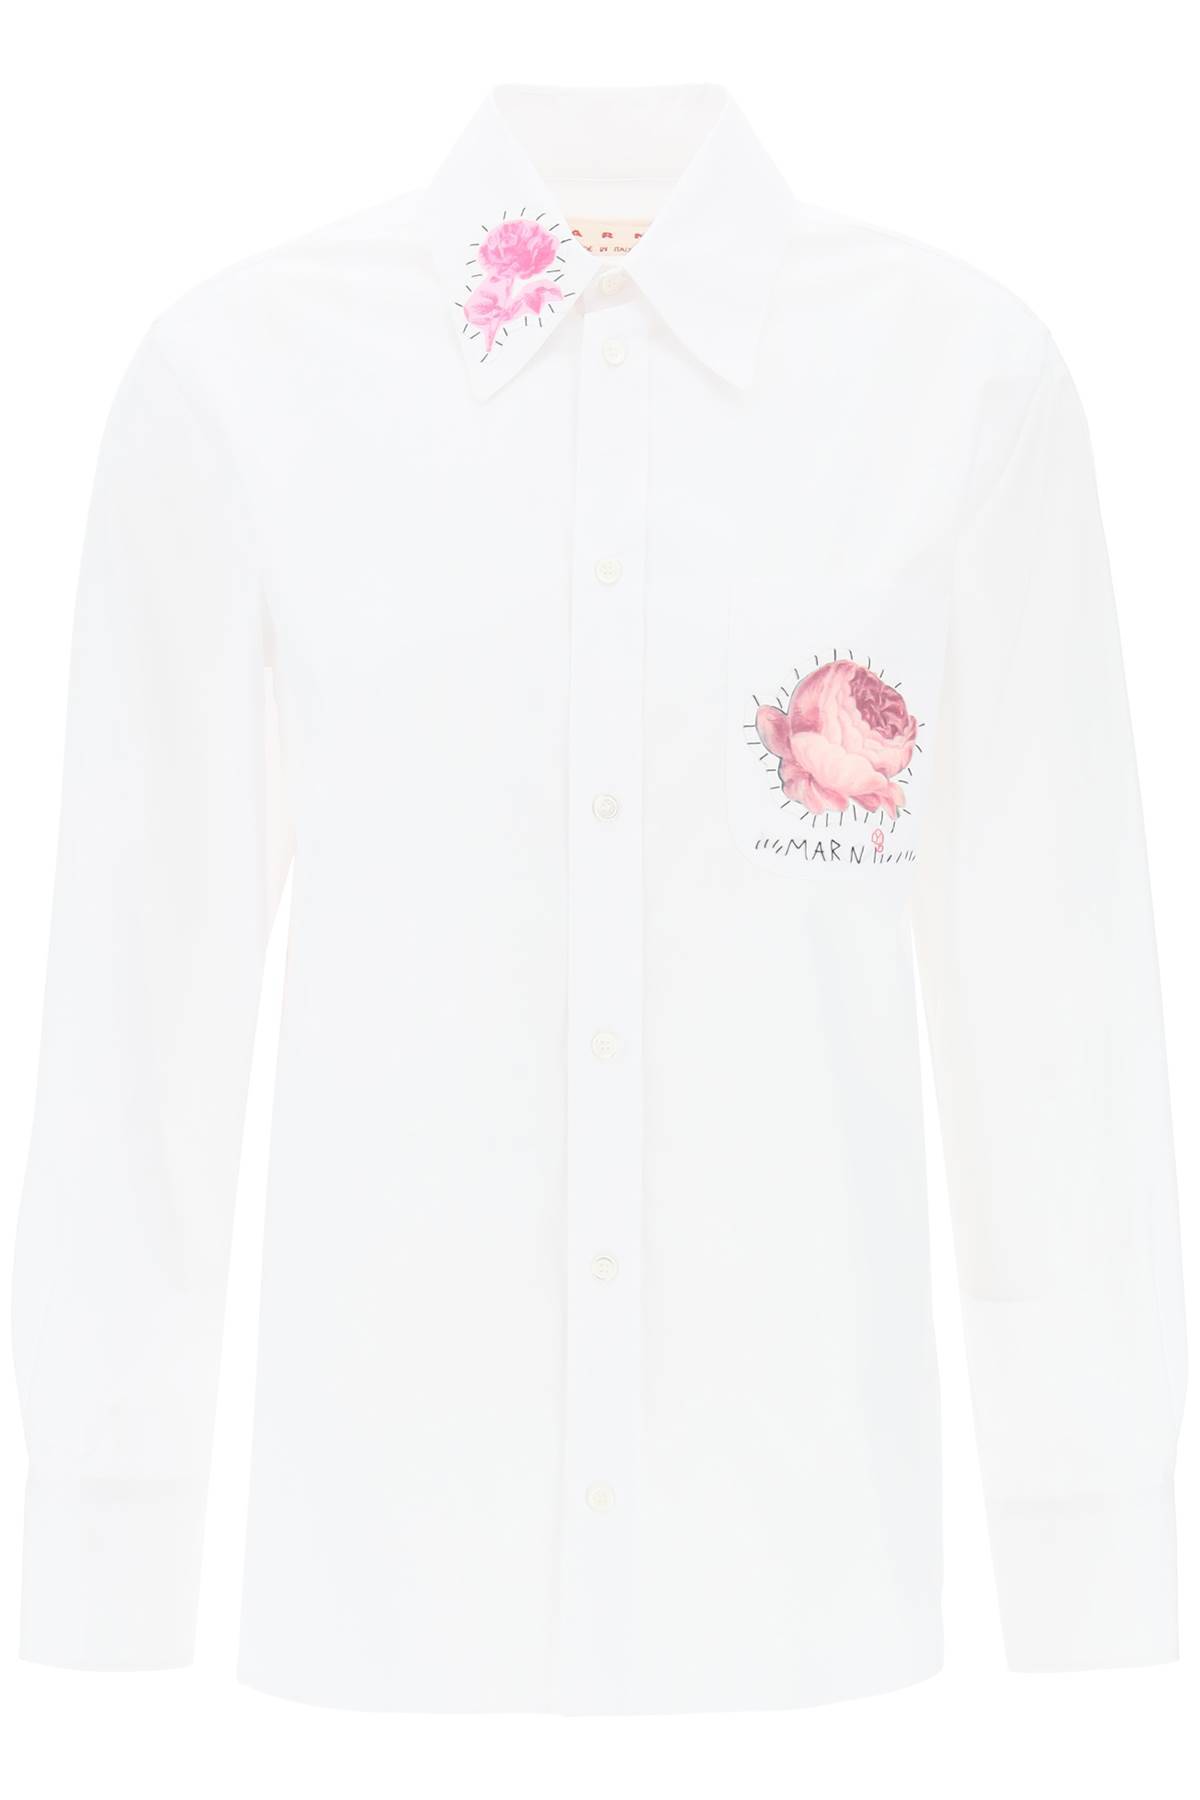 Marni MARNI "shirt with flower print patch and embroidered logo